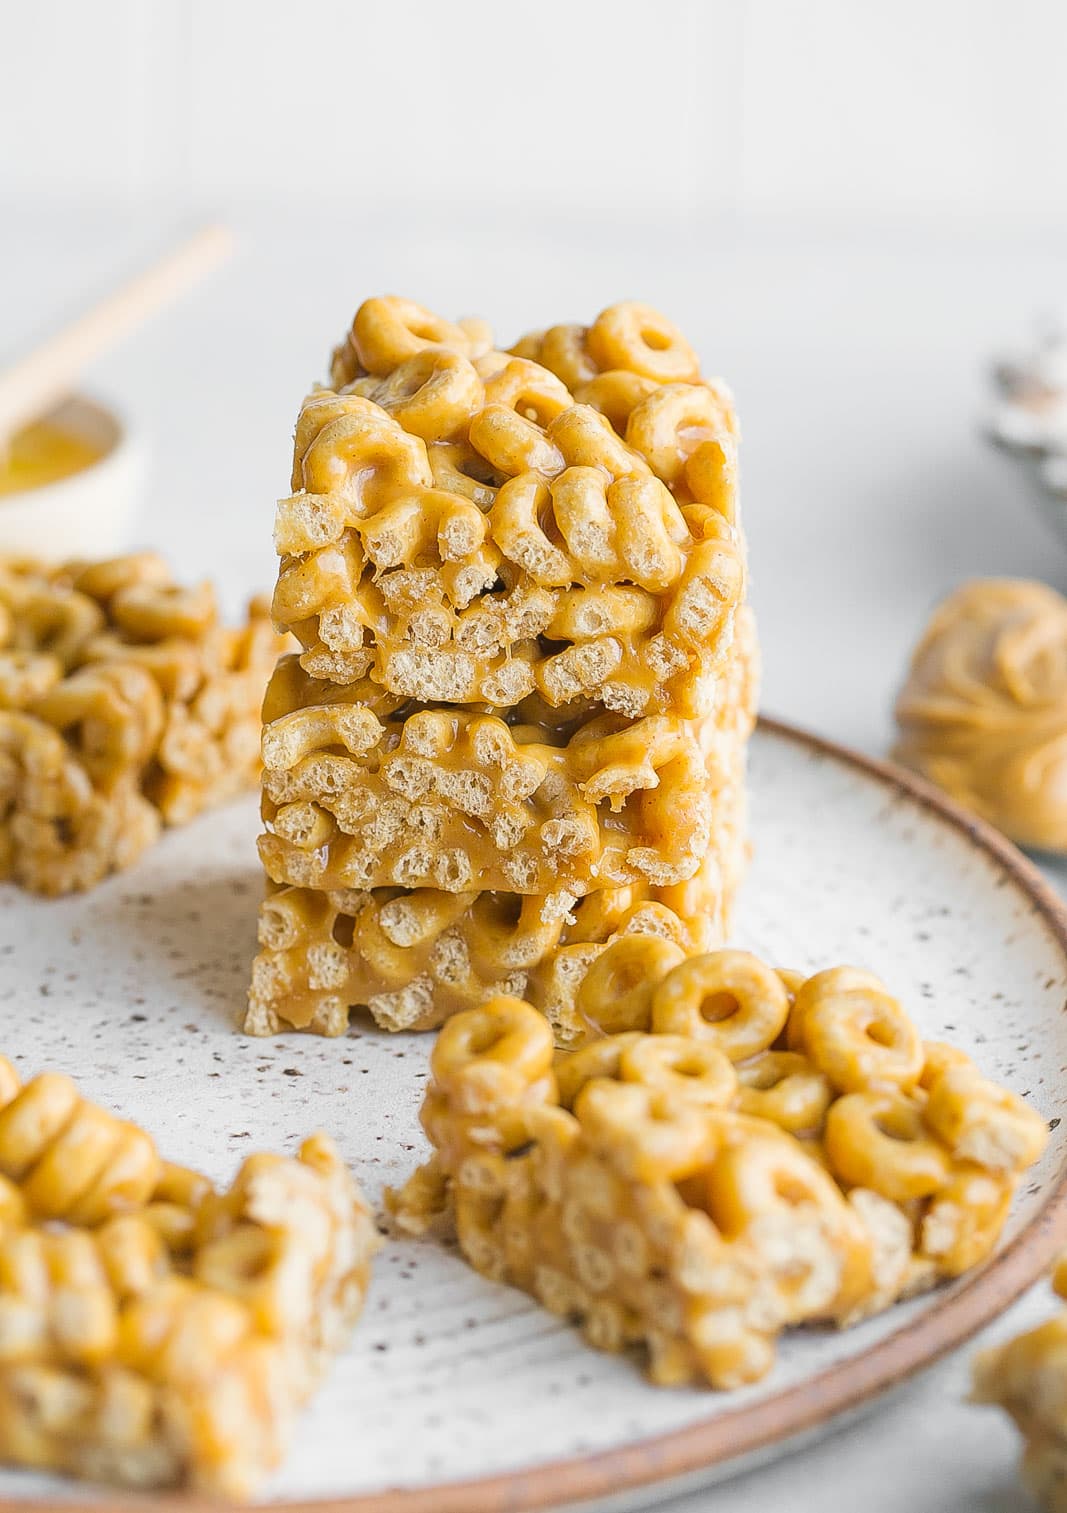 Peanut Butter Cheerio Bars on a plate.